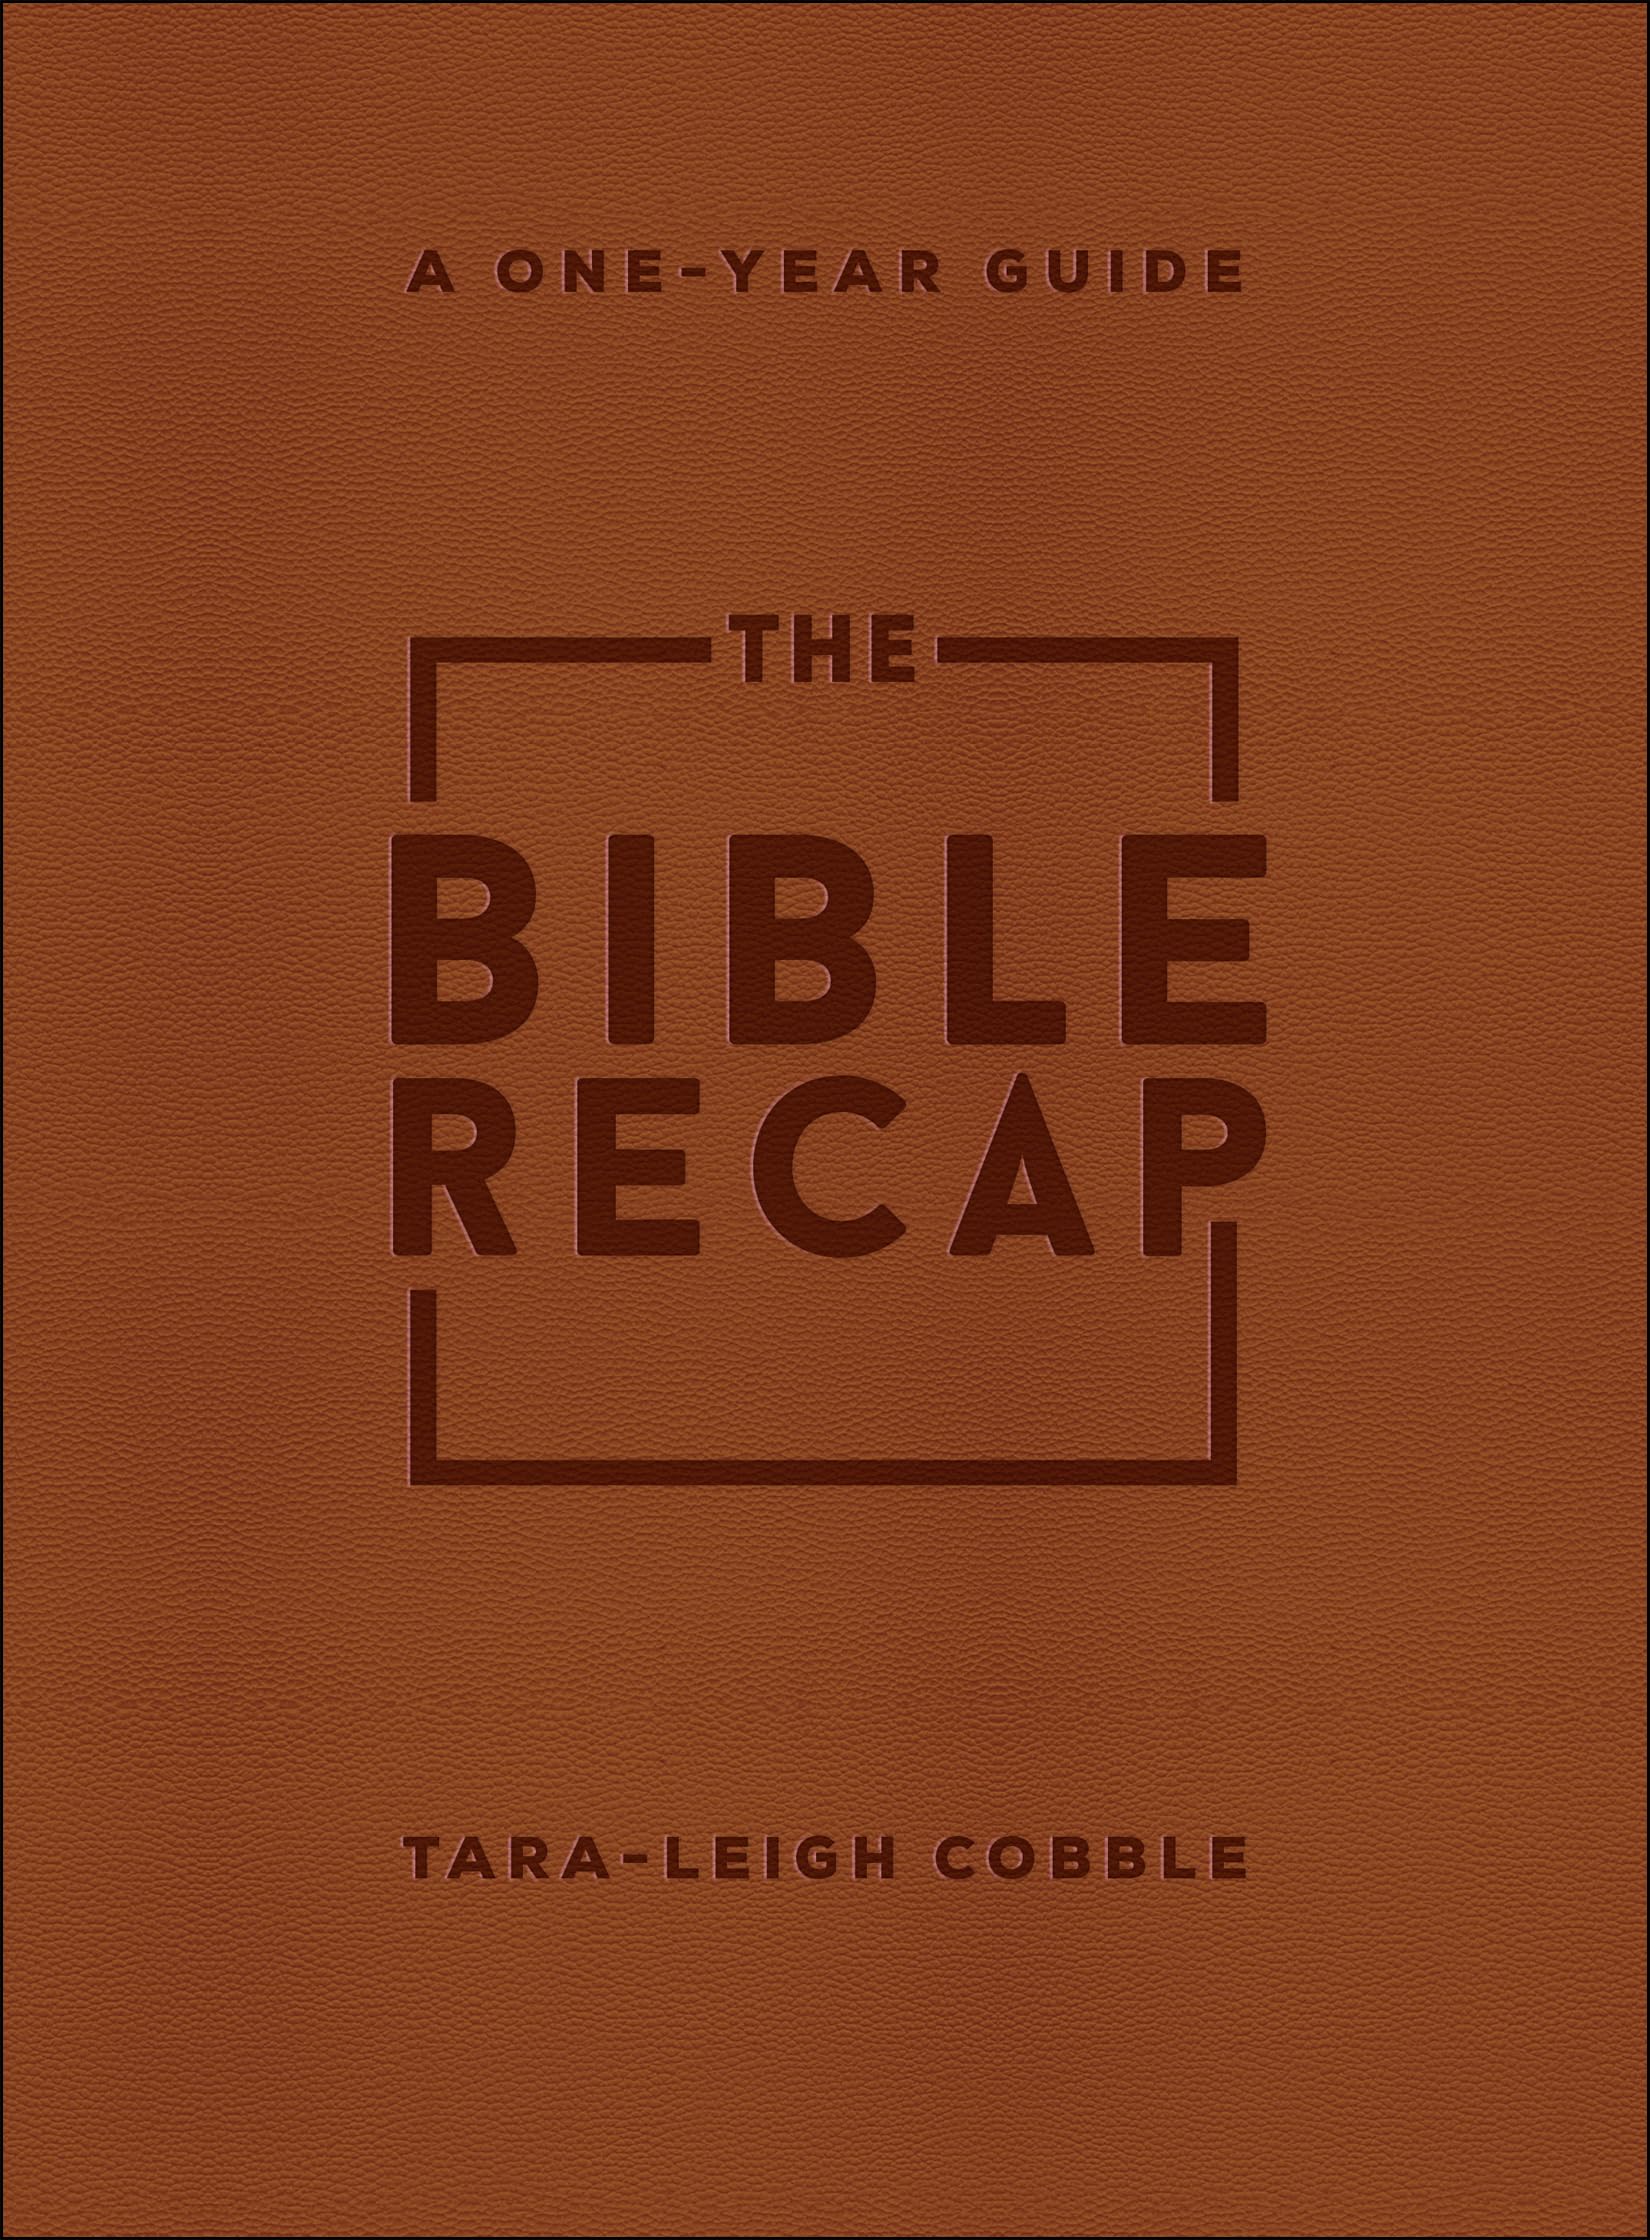 The Bible Recap: A One-Year Guide to Reading and Understanding the Entire Bible by Cobble, Tara-Leigh